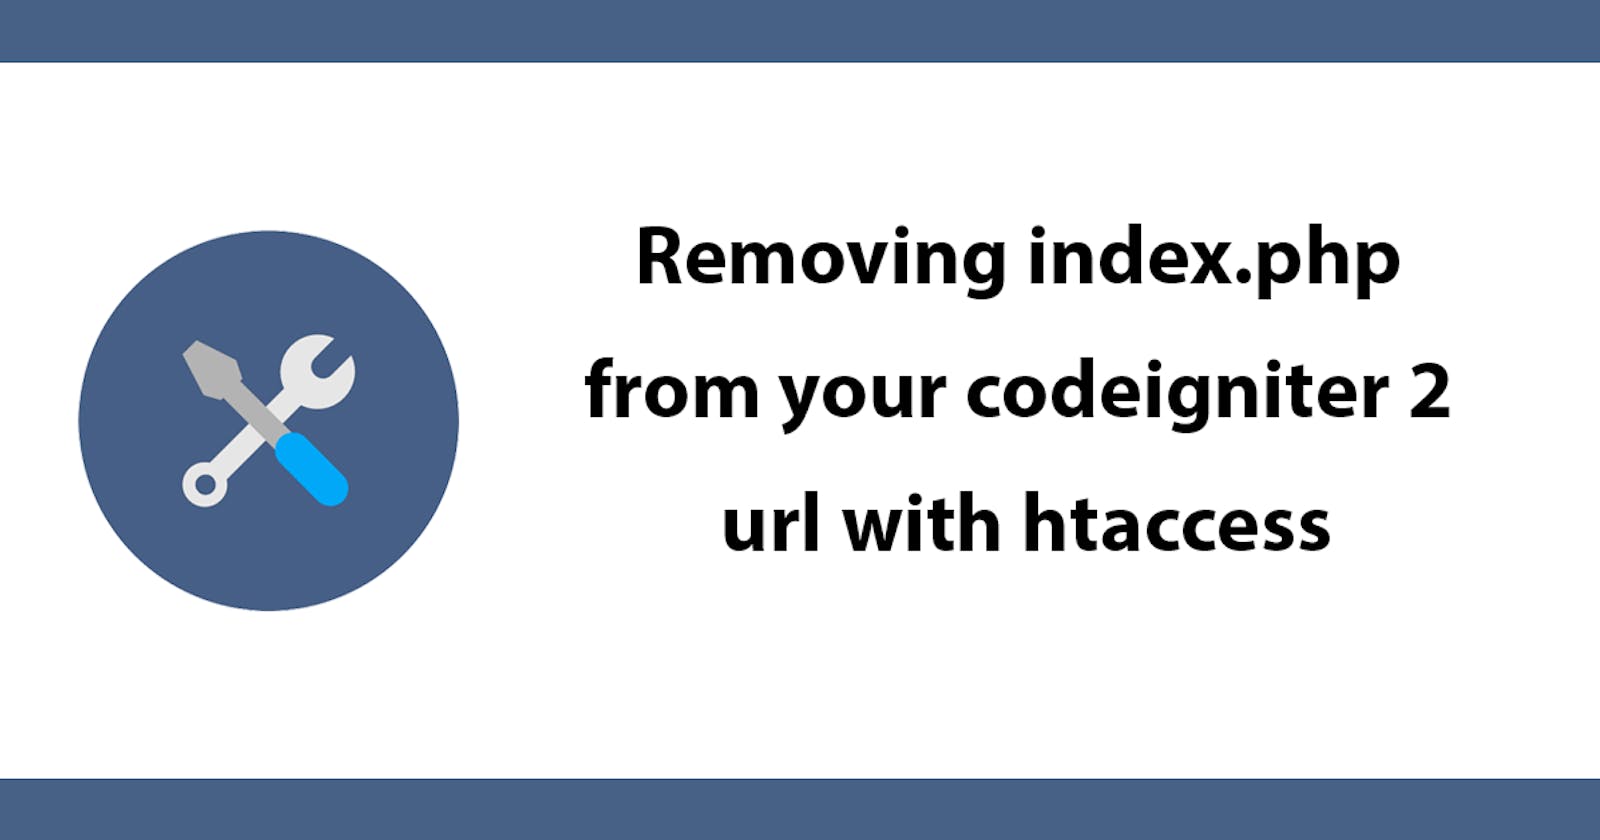 Removing index.php from your codeigniter 2 url with htaccess